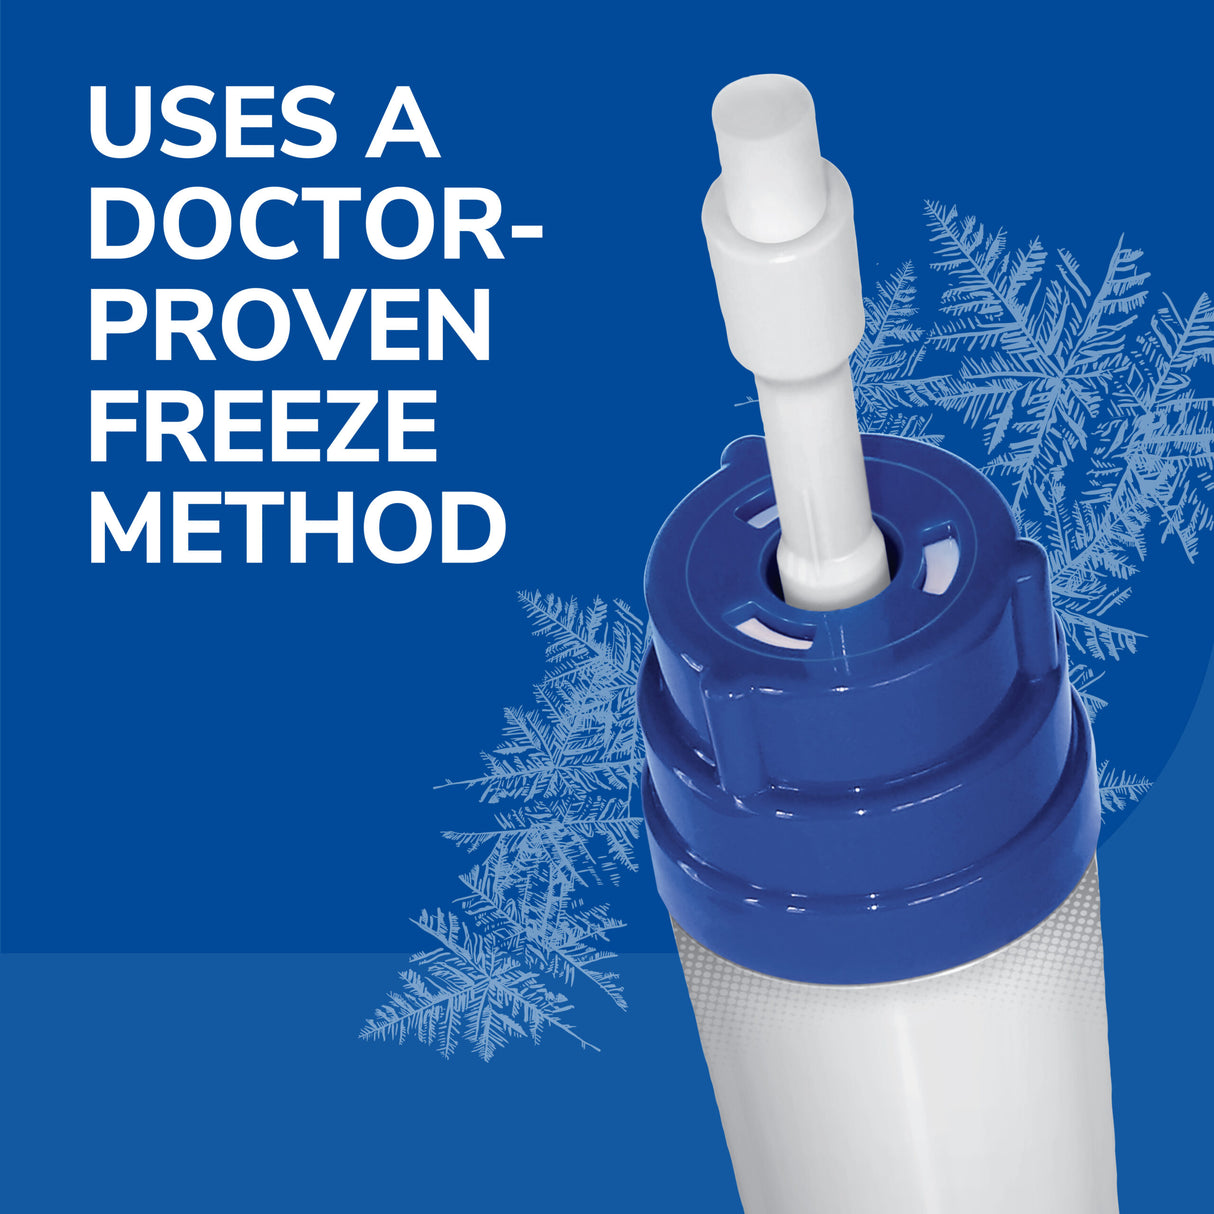 image of uses a doctor proven freeze method